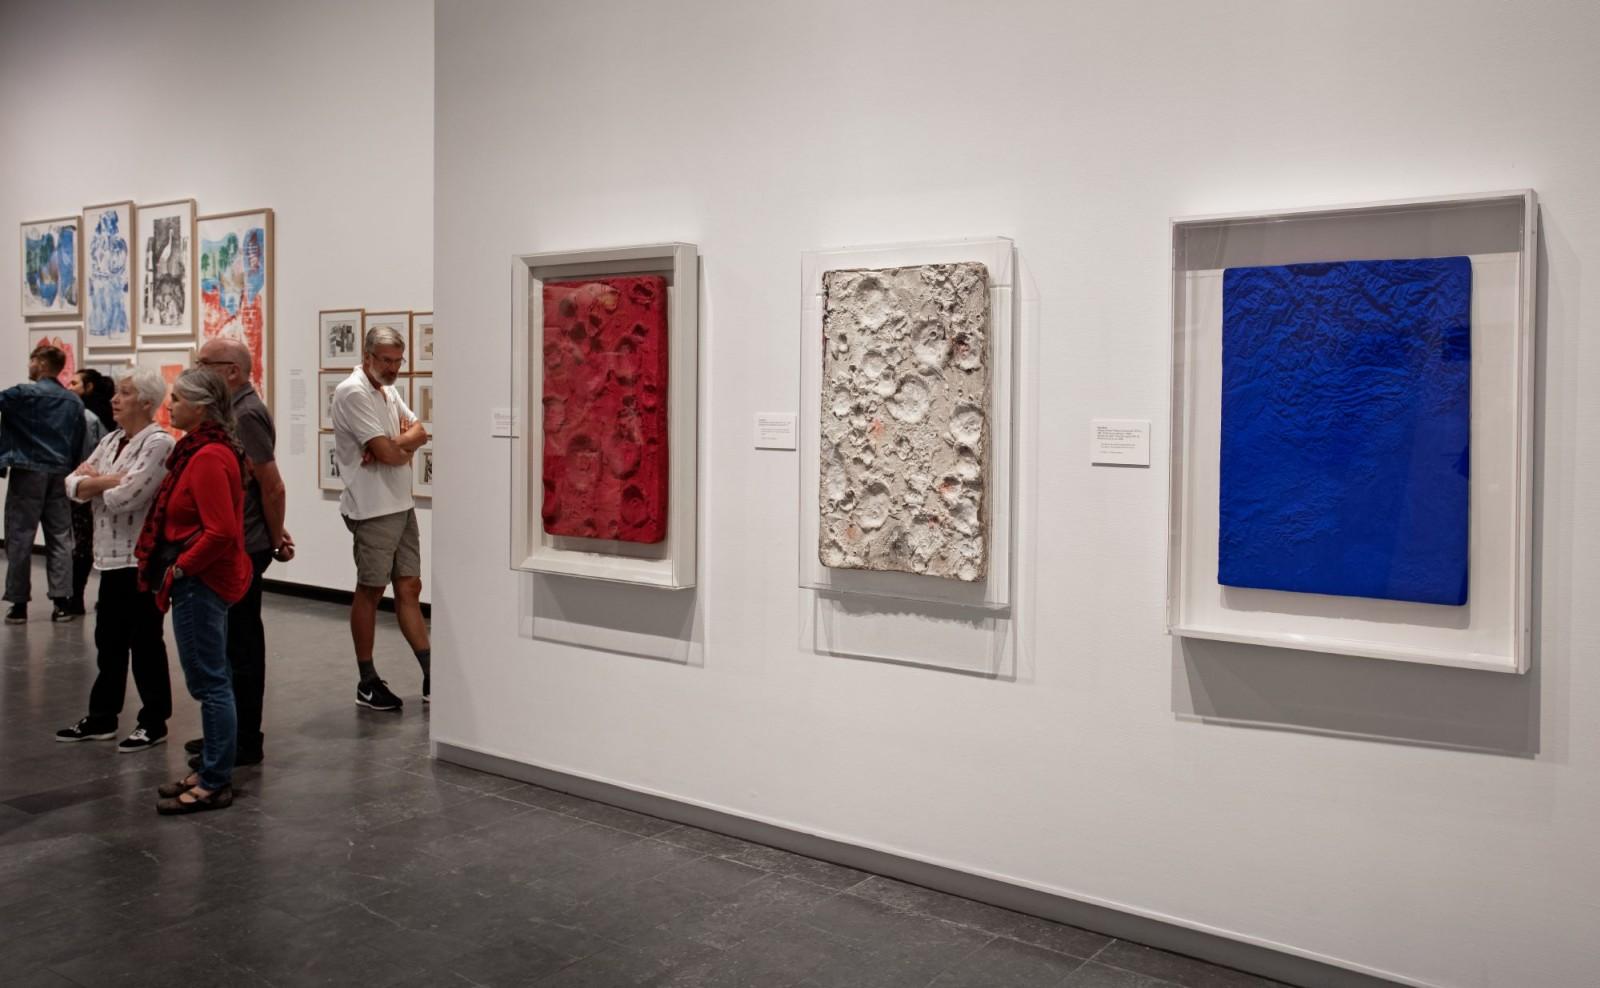 View of the exhibition "The Moon: From Inner Worlds to Outer Space", Louisiana Museum of Modern Art, 2018 (RP 10, RP 12, RP 21)